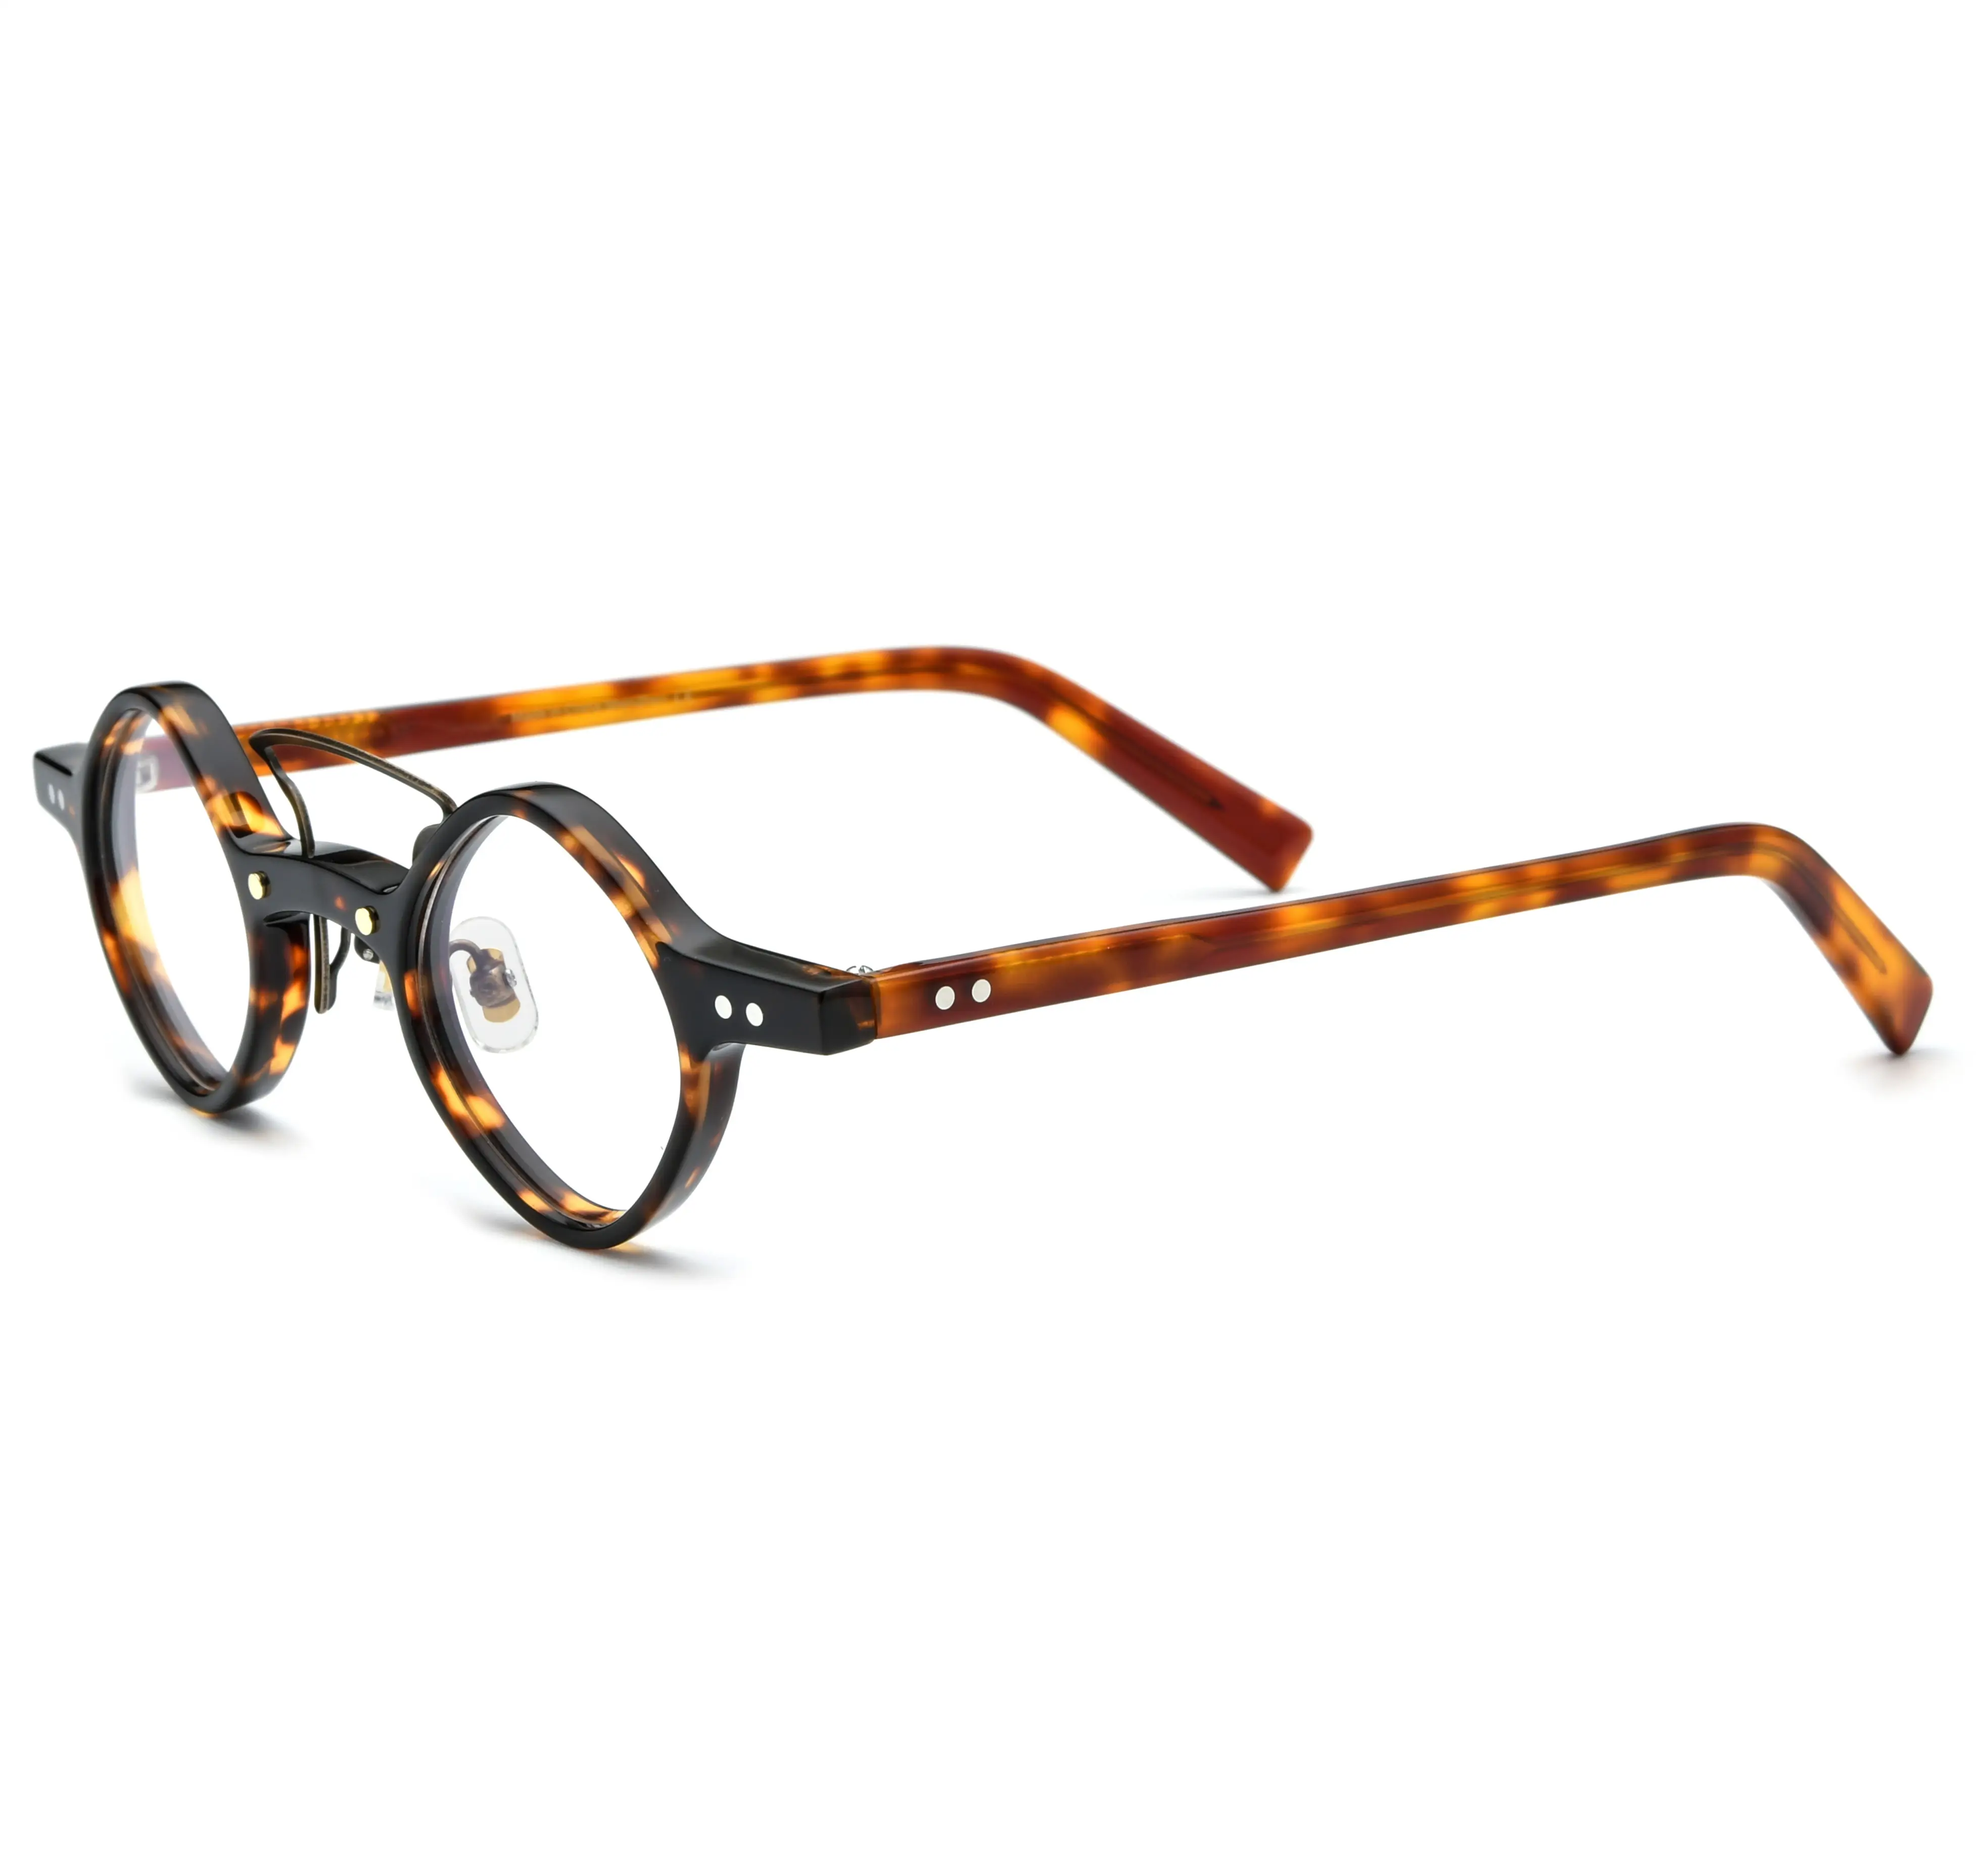 Bright solid color transparent hawksbill color metal strip splicing near round glasses frame